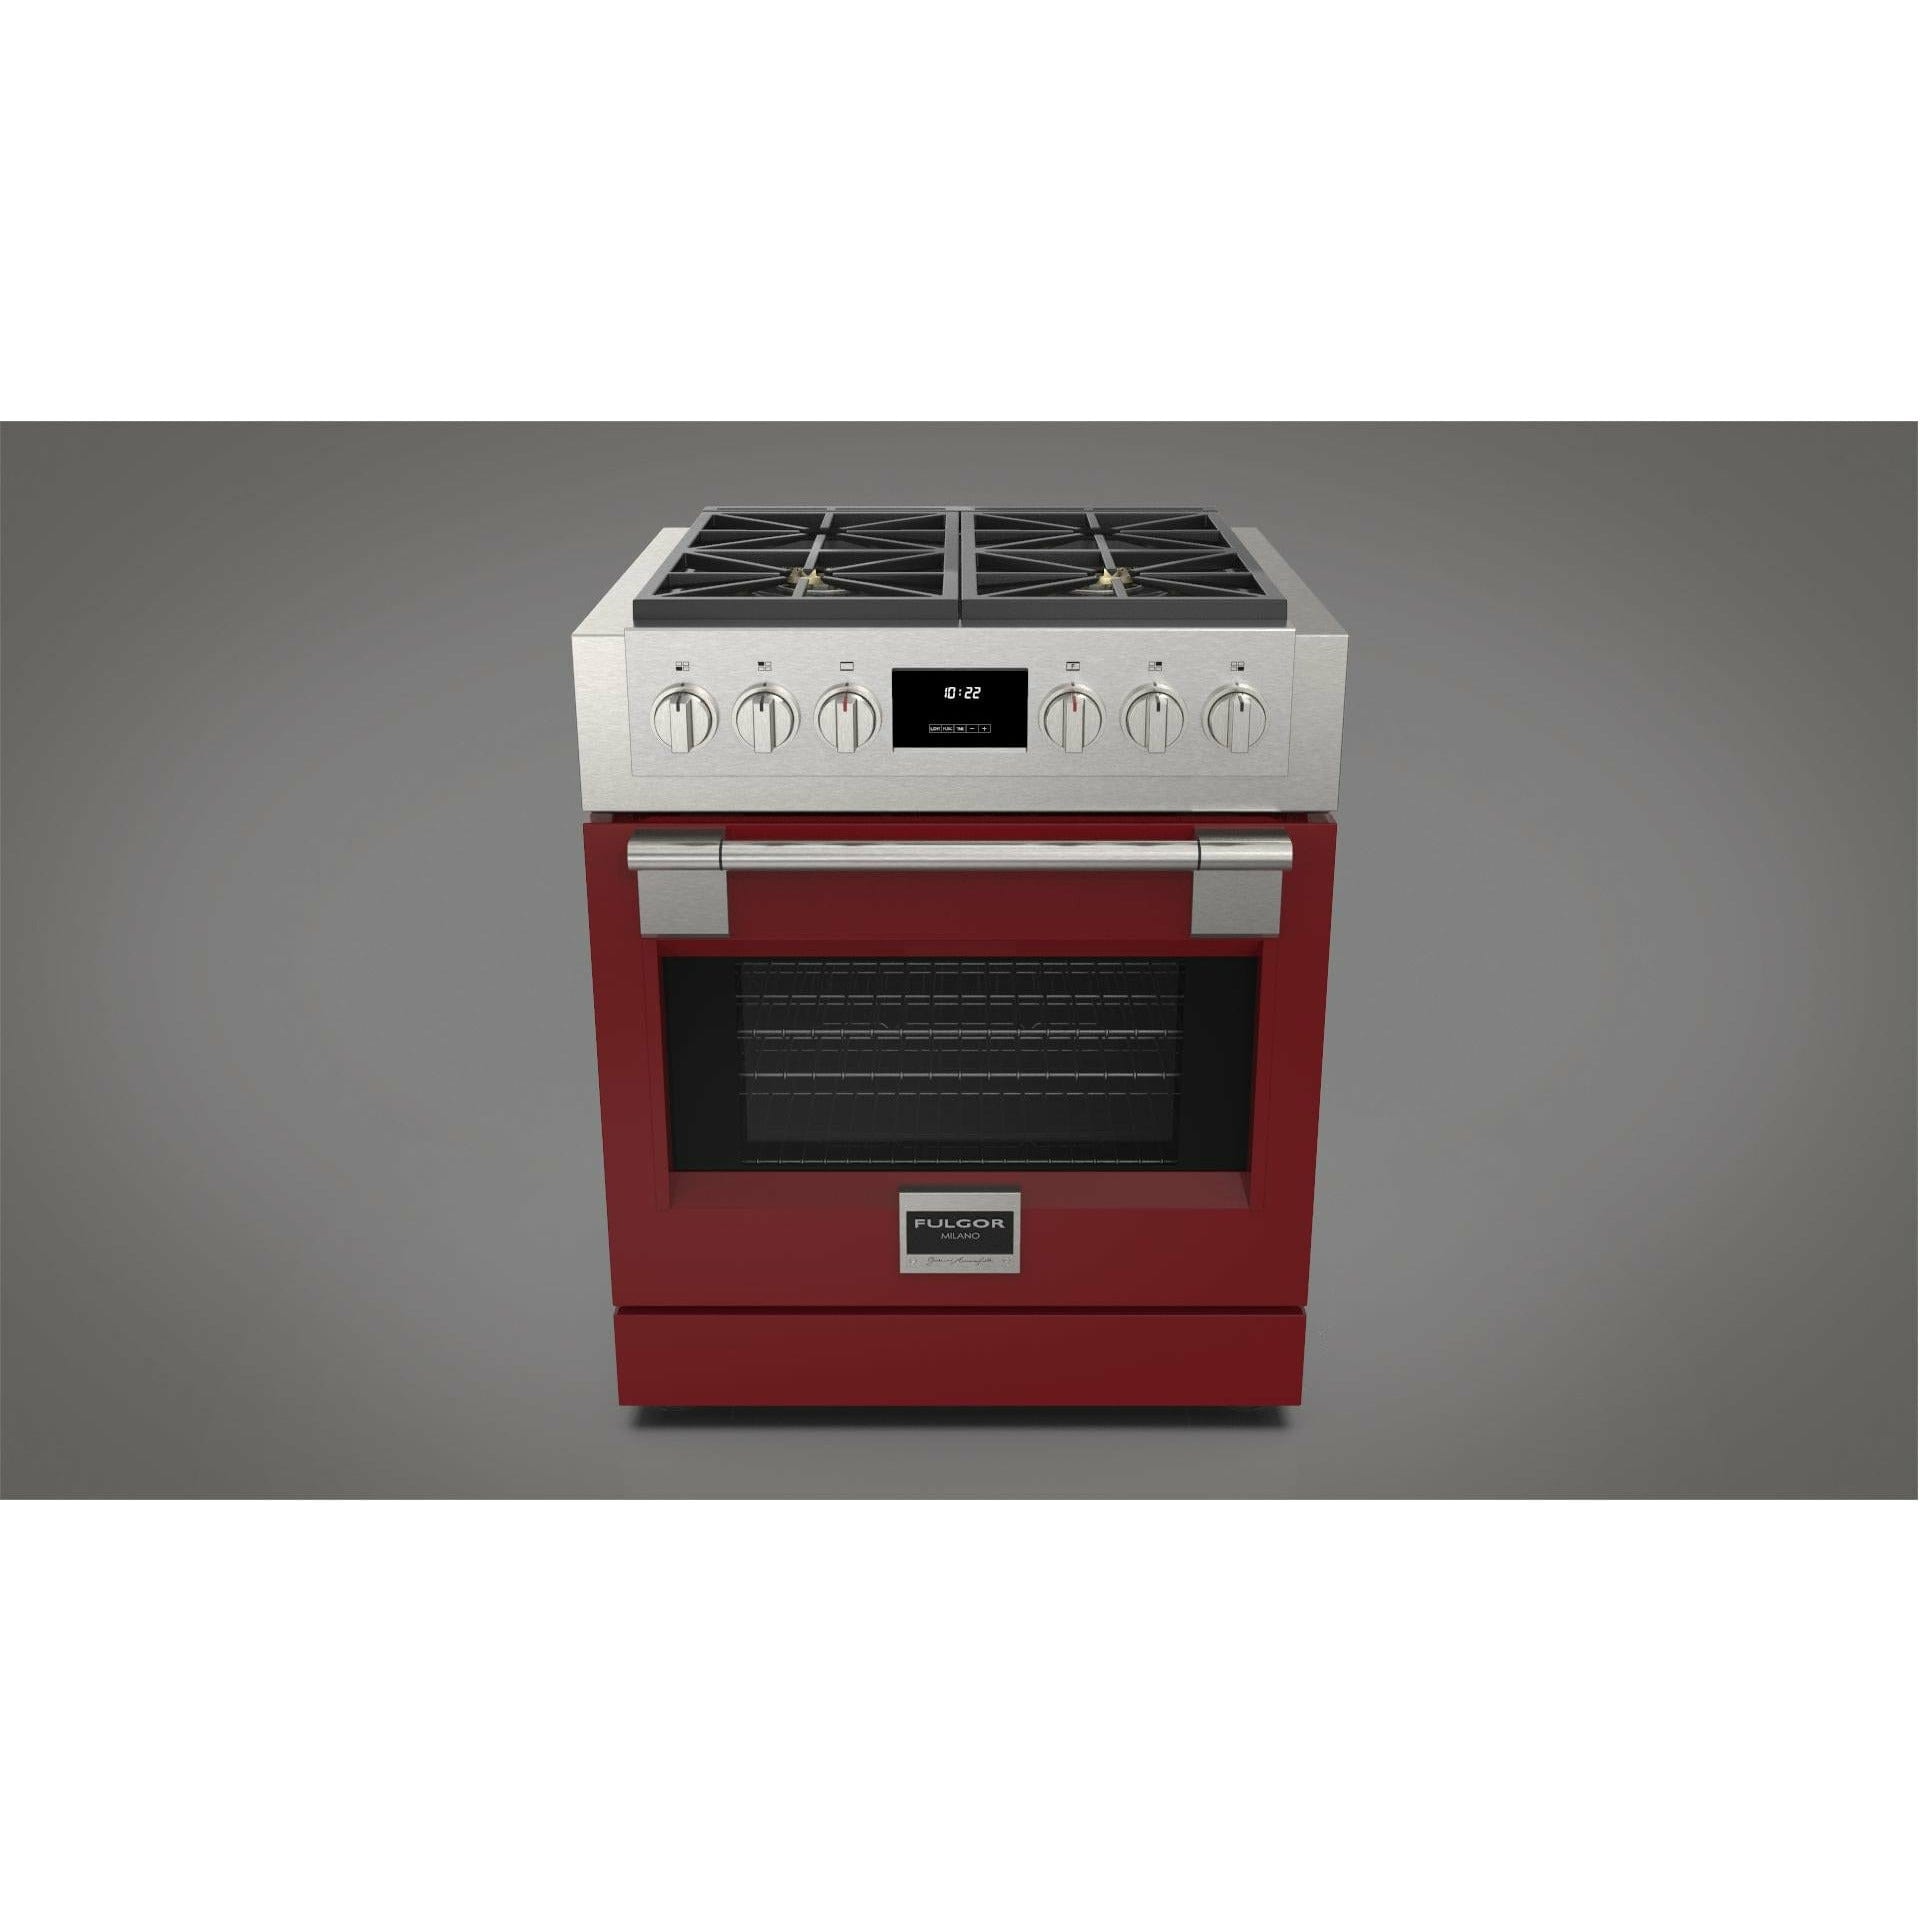 Fulgor Milano 30" Professional All Gas Range with 4 Dual-Flame Burners, 4.4 cu. ft. Capacity w/ Stainless Steel - F6PGR304S2 Ranges PDRKIT30RD Luxury Appliances Direct